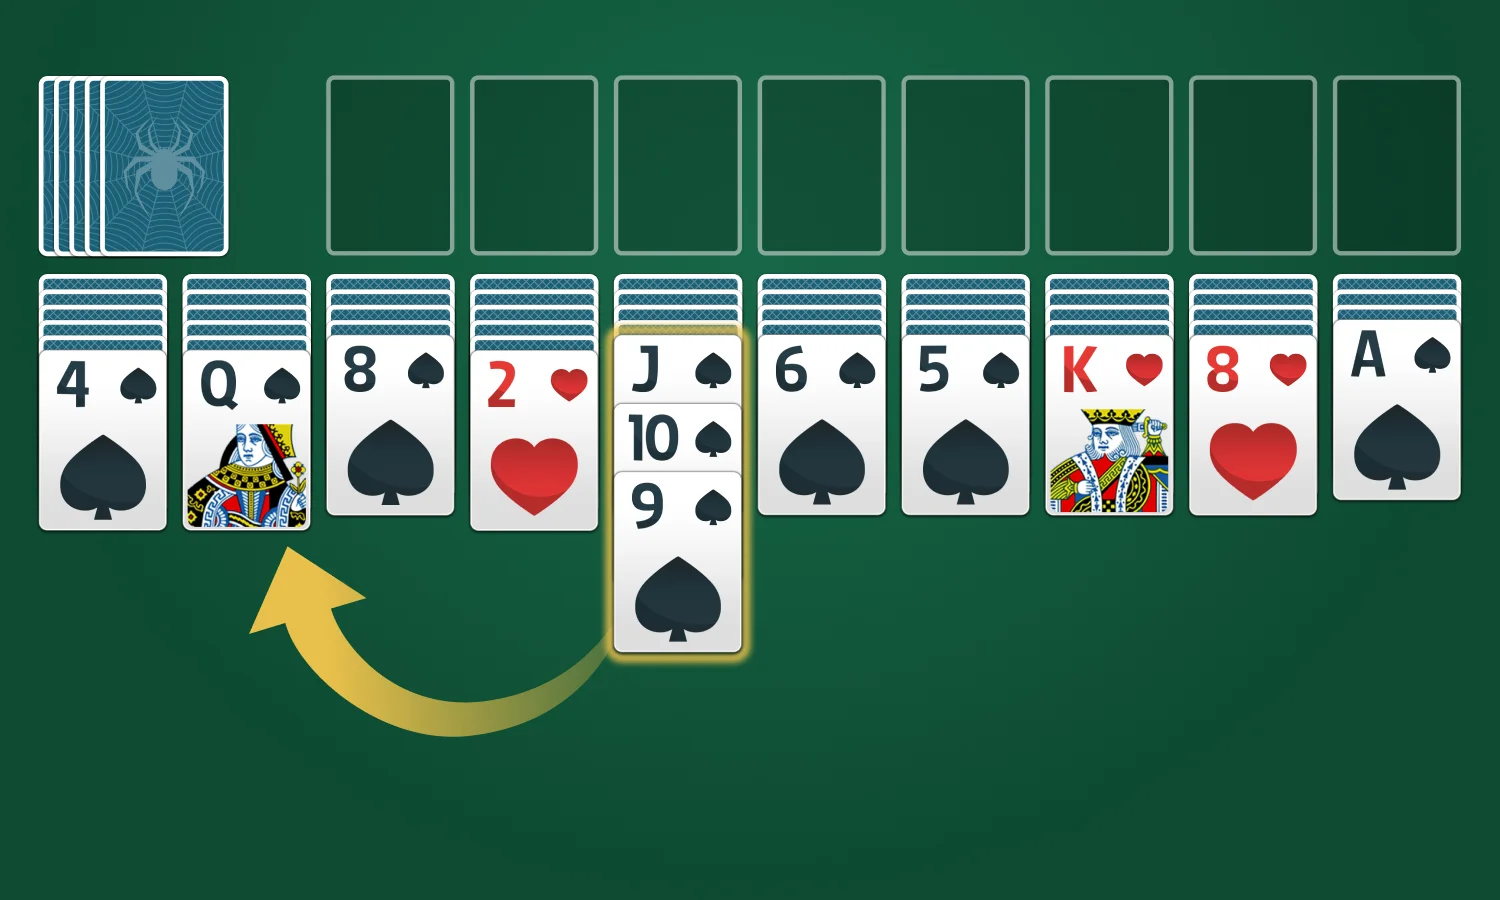 How to Play Spider Solitaire